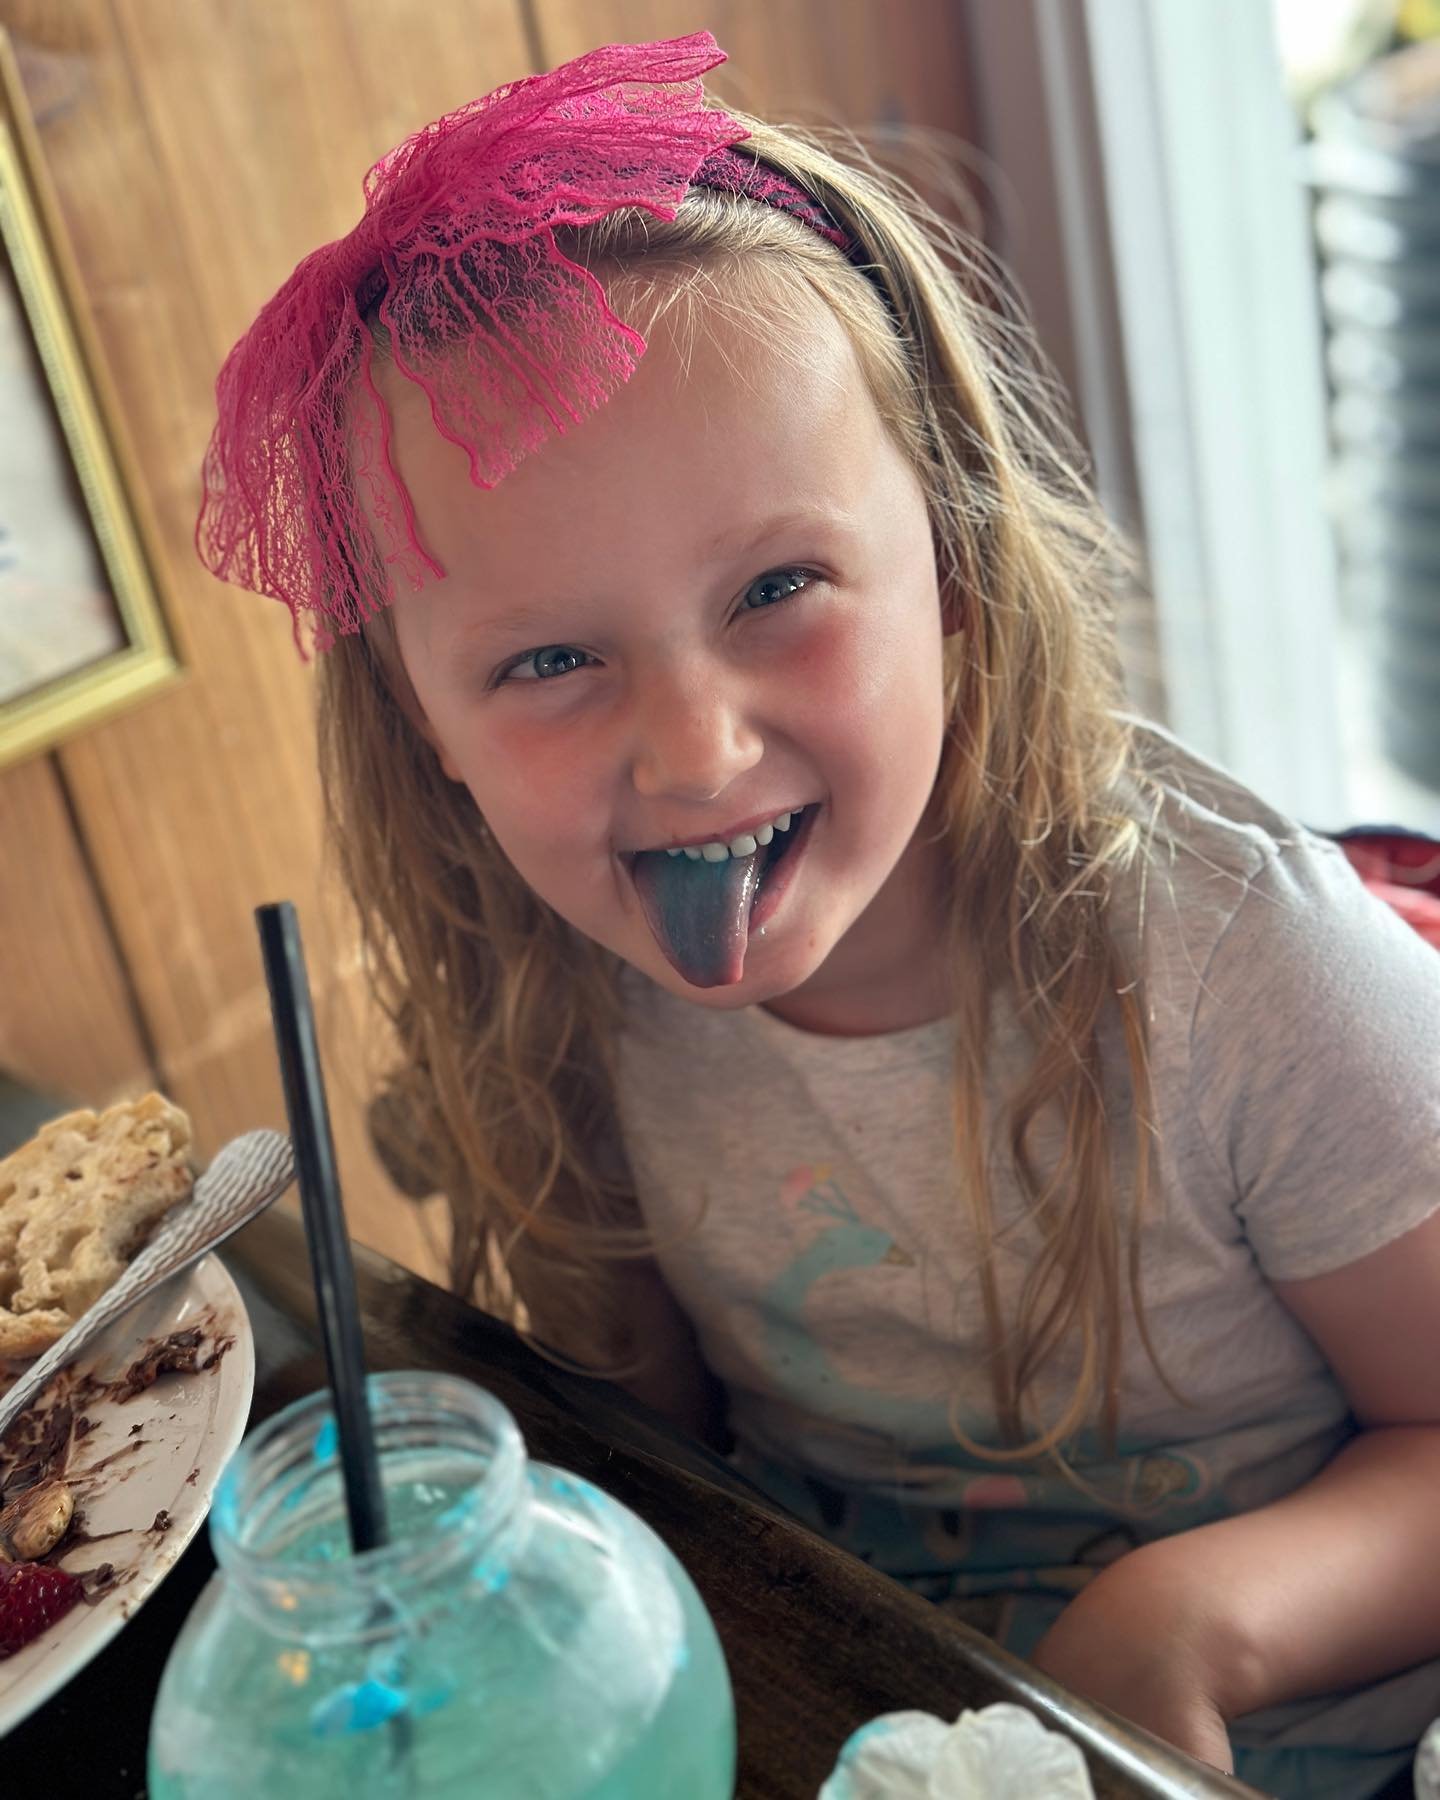 Happy Mothers Day from all the crazy kids! This crazy-eyed little minnow is enjoying a Ketch Kids Kocktail filled with cotton candy kelp and gummy sharks. 🦈

#halfmoonbay #ketch #mothersdays #sharks